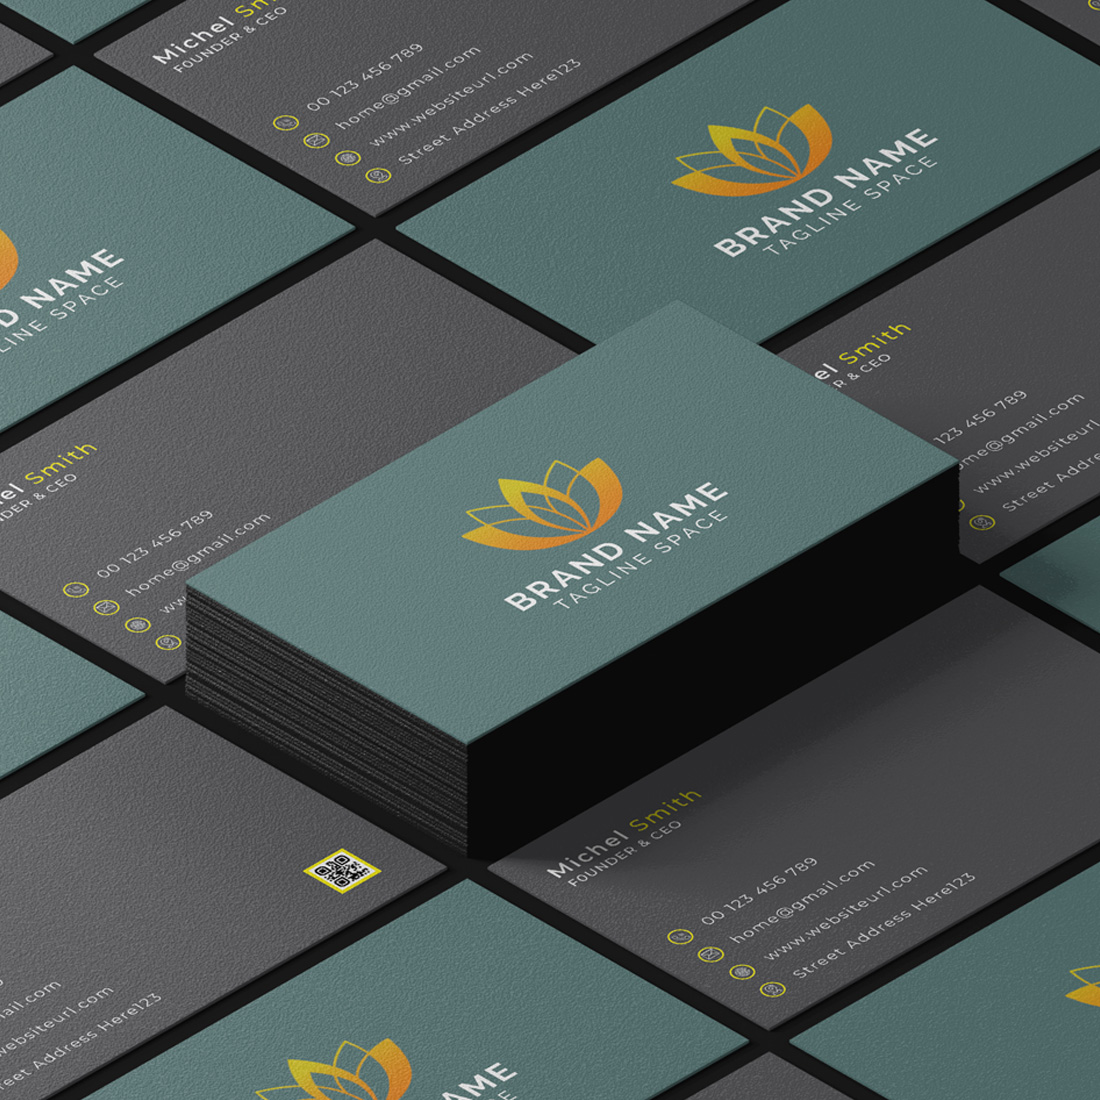 Simple Minimal Business Card and Visiting Card Template Design cover image.